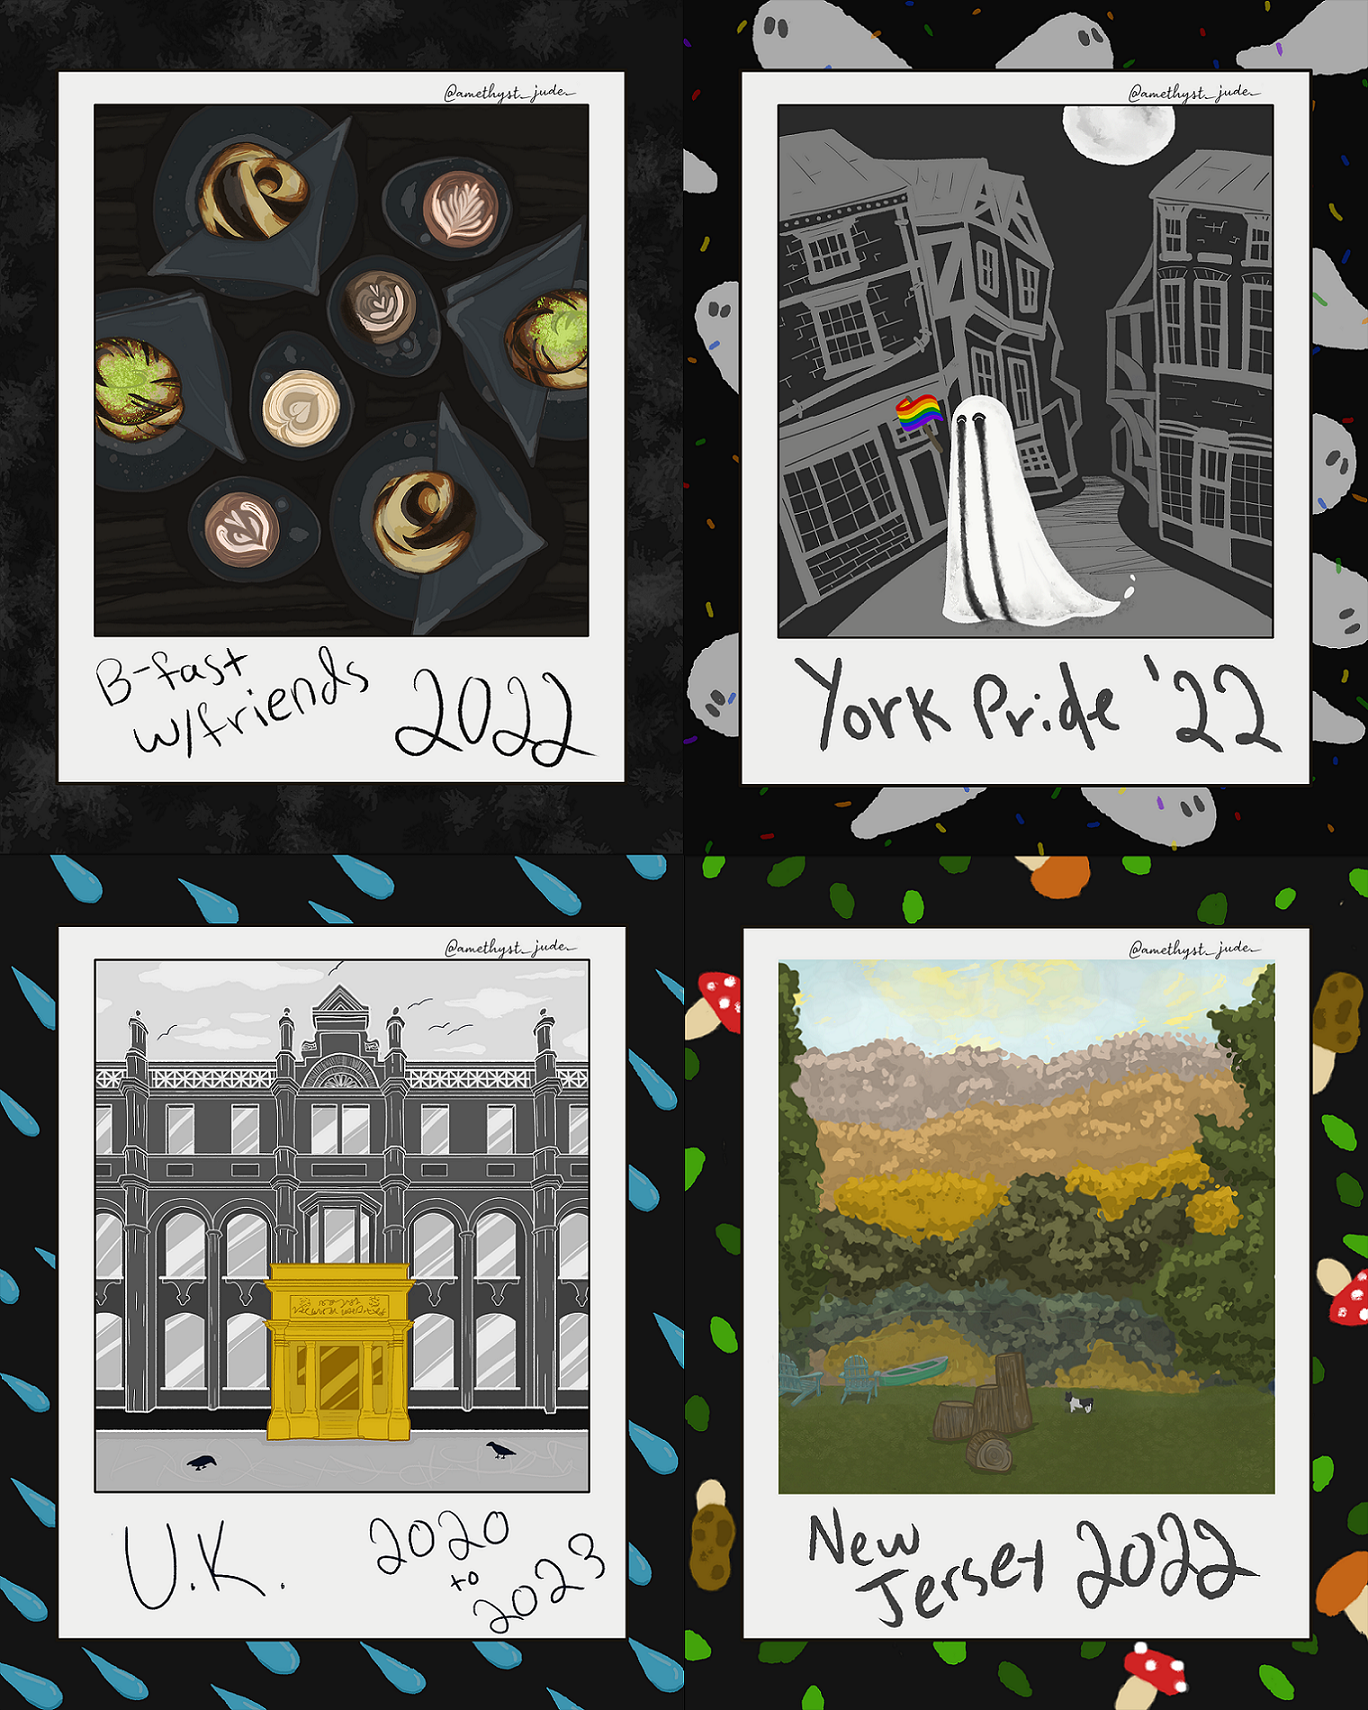 Digital Illustration work by Cydnee Inmon showing 4 polaroids of different places or events.